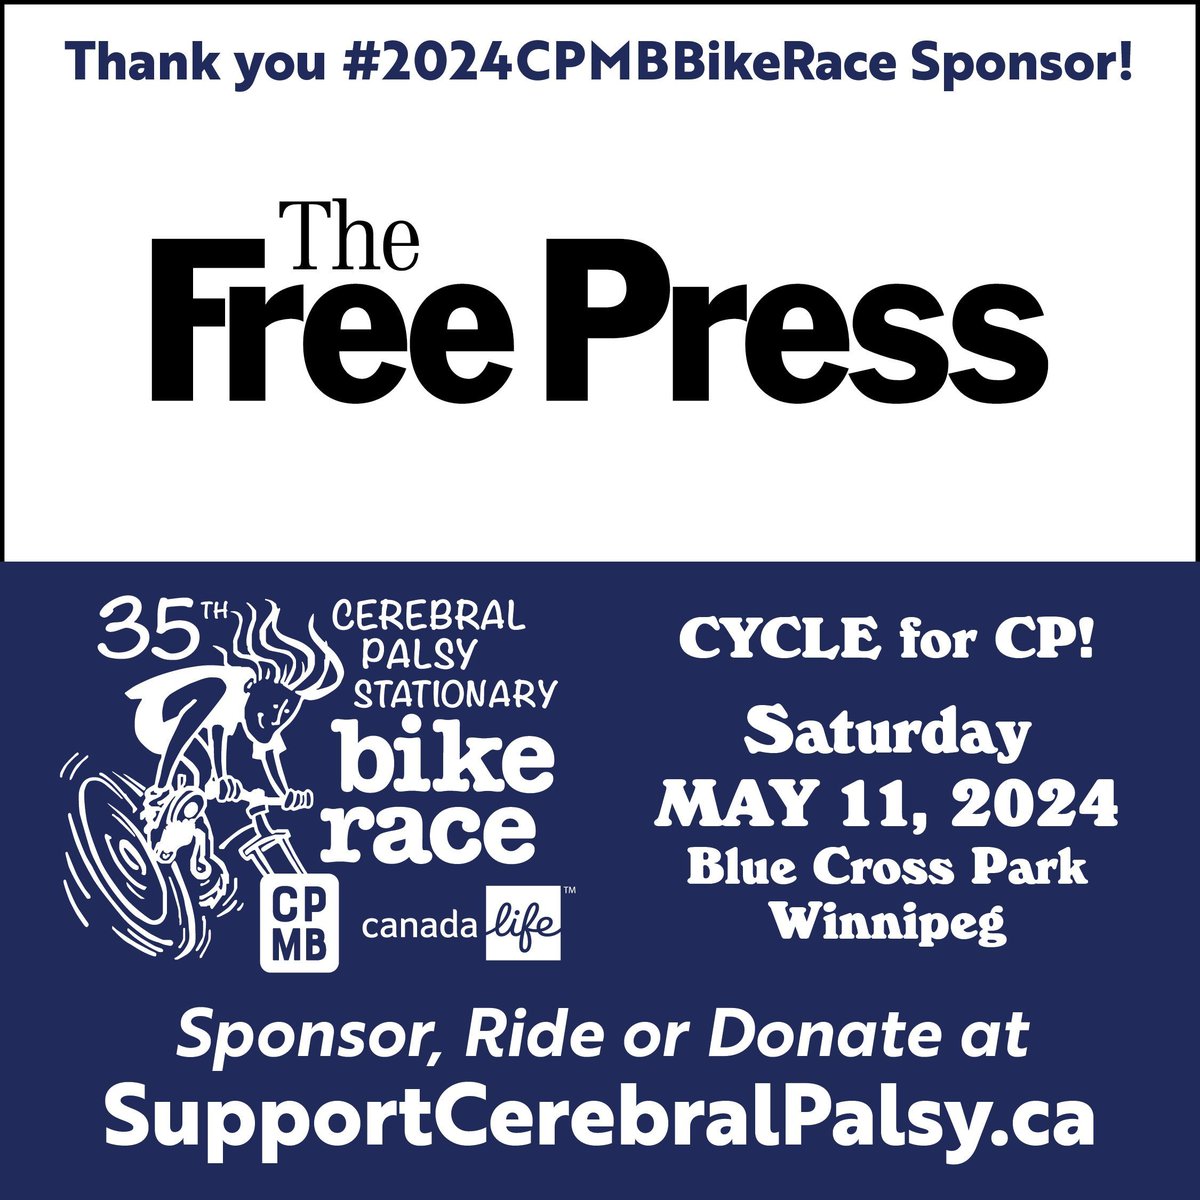 Thanks to @winnipegfreepress for your support! #CPProud